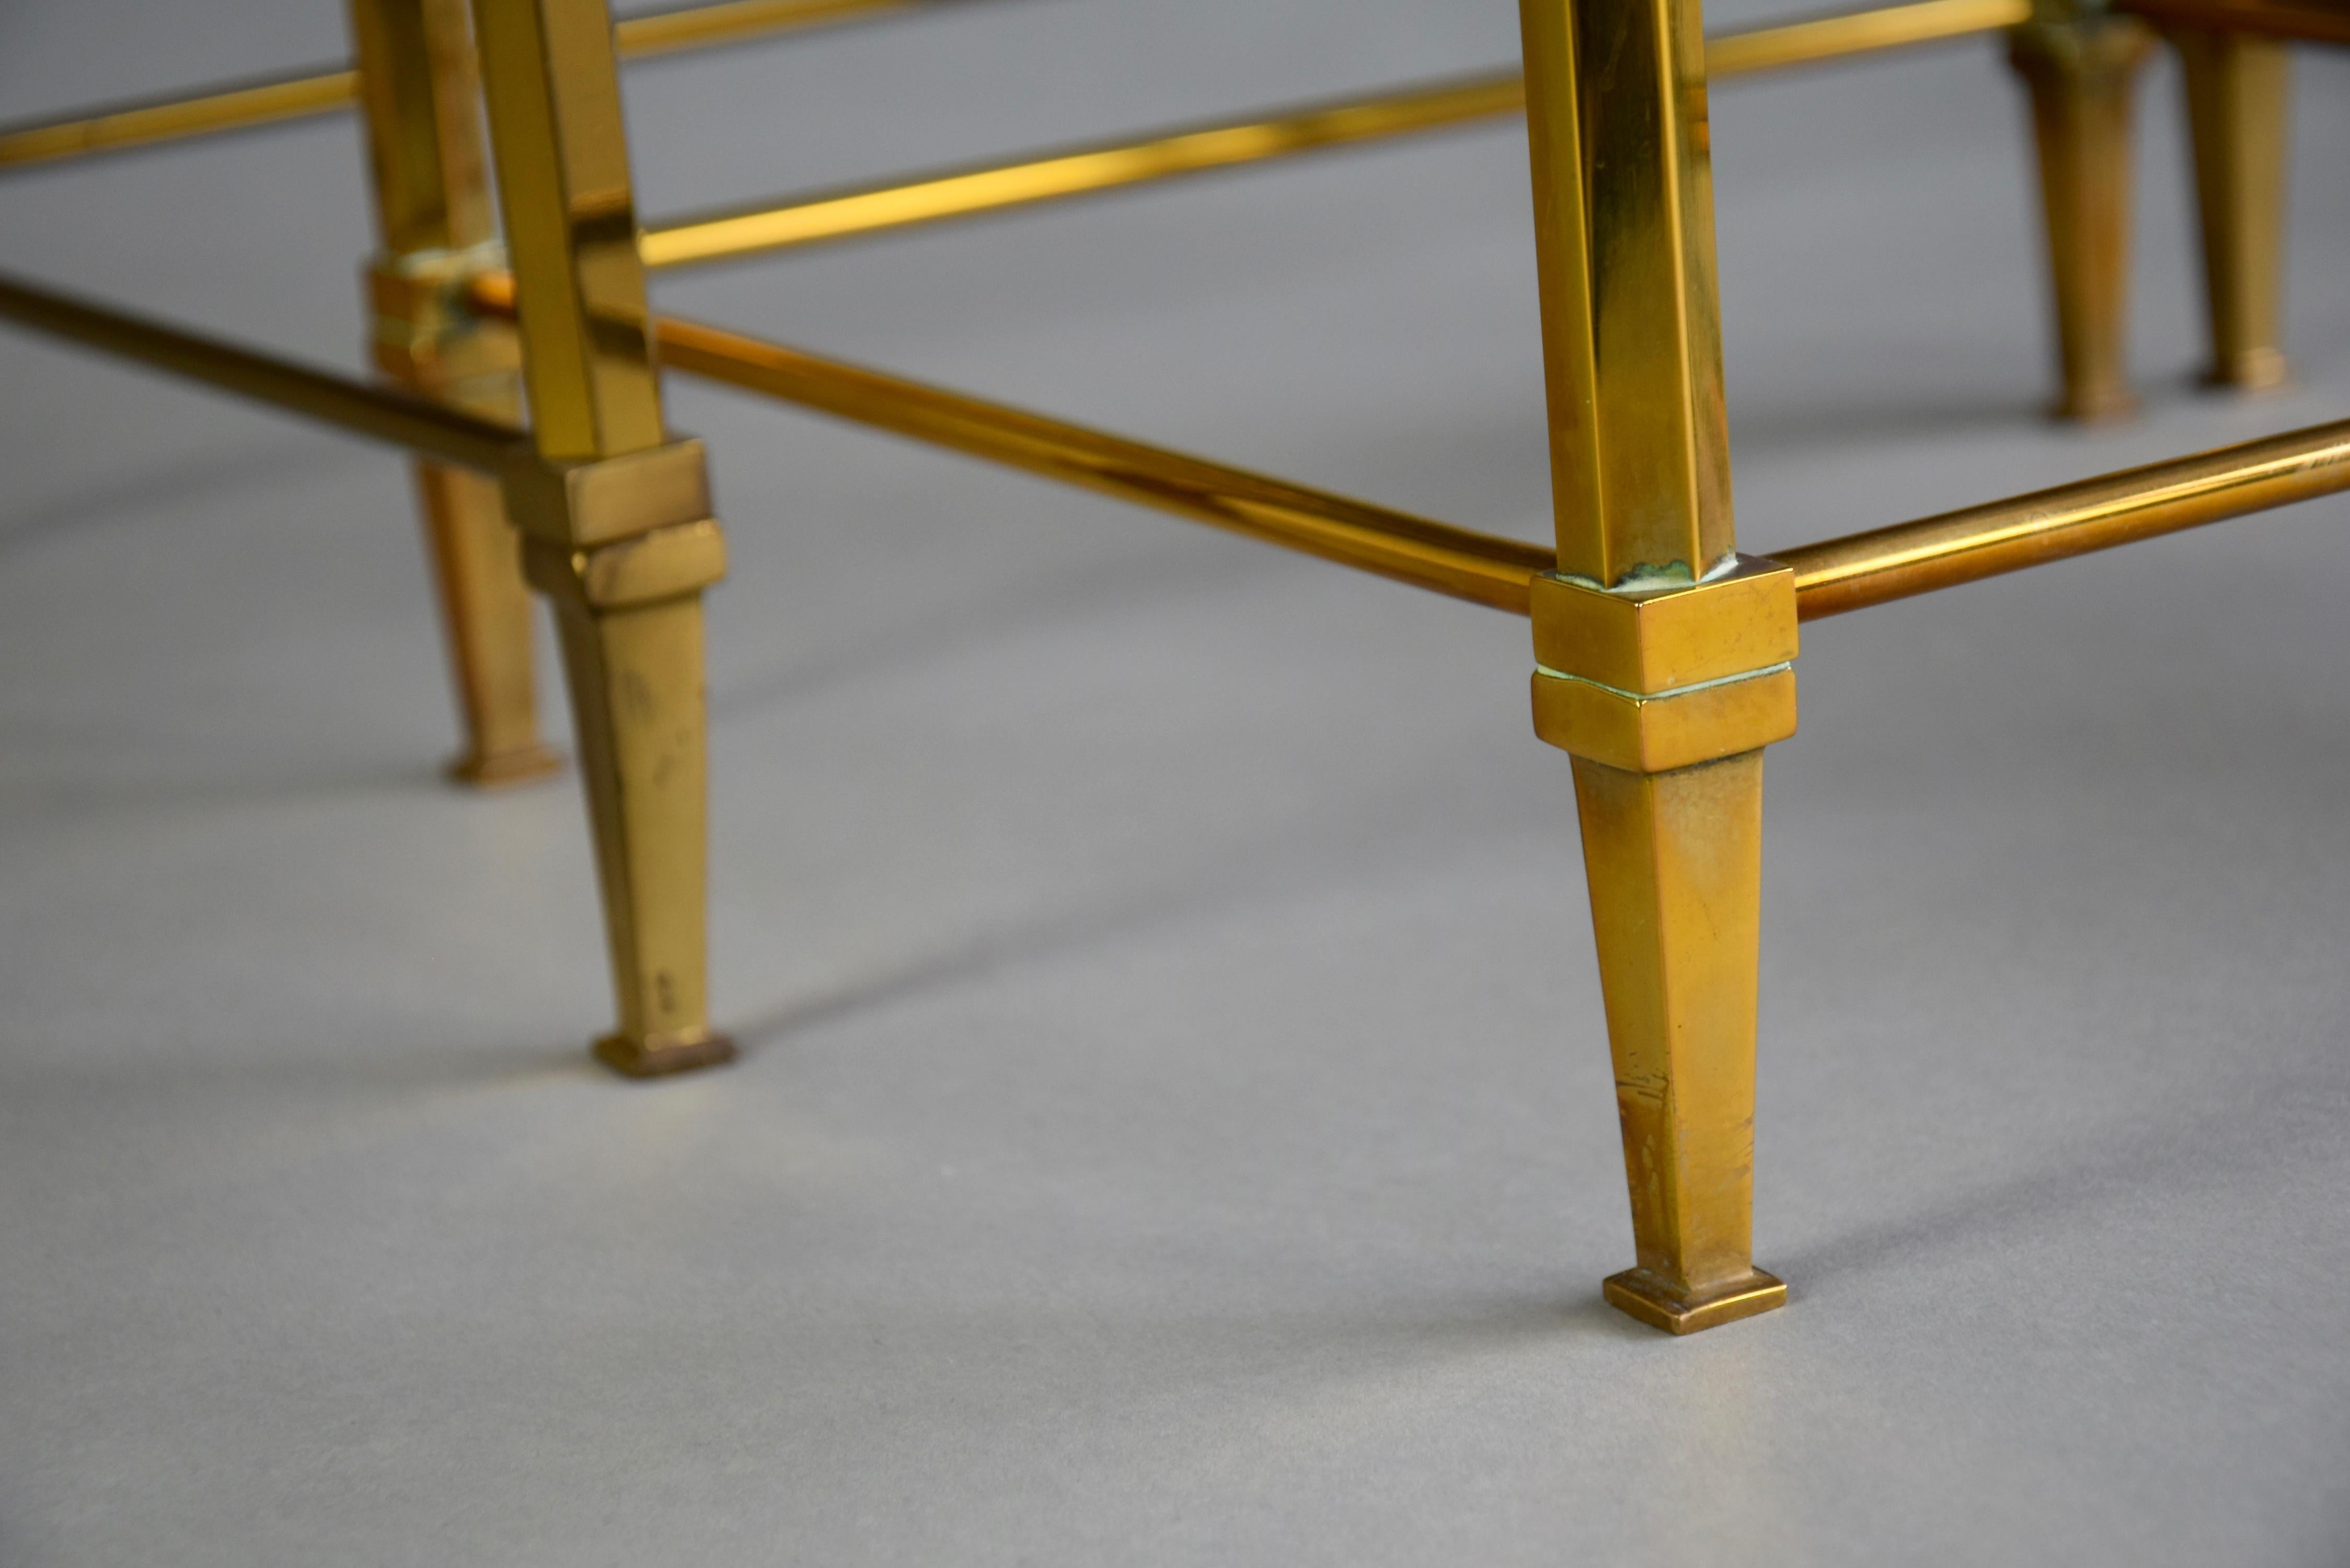 French Mid-century Modern Neoclassical Brass Nesting Tables Attributed to Maison Jansen For Sale